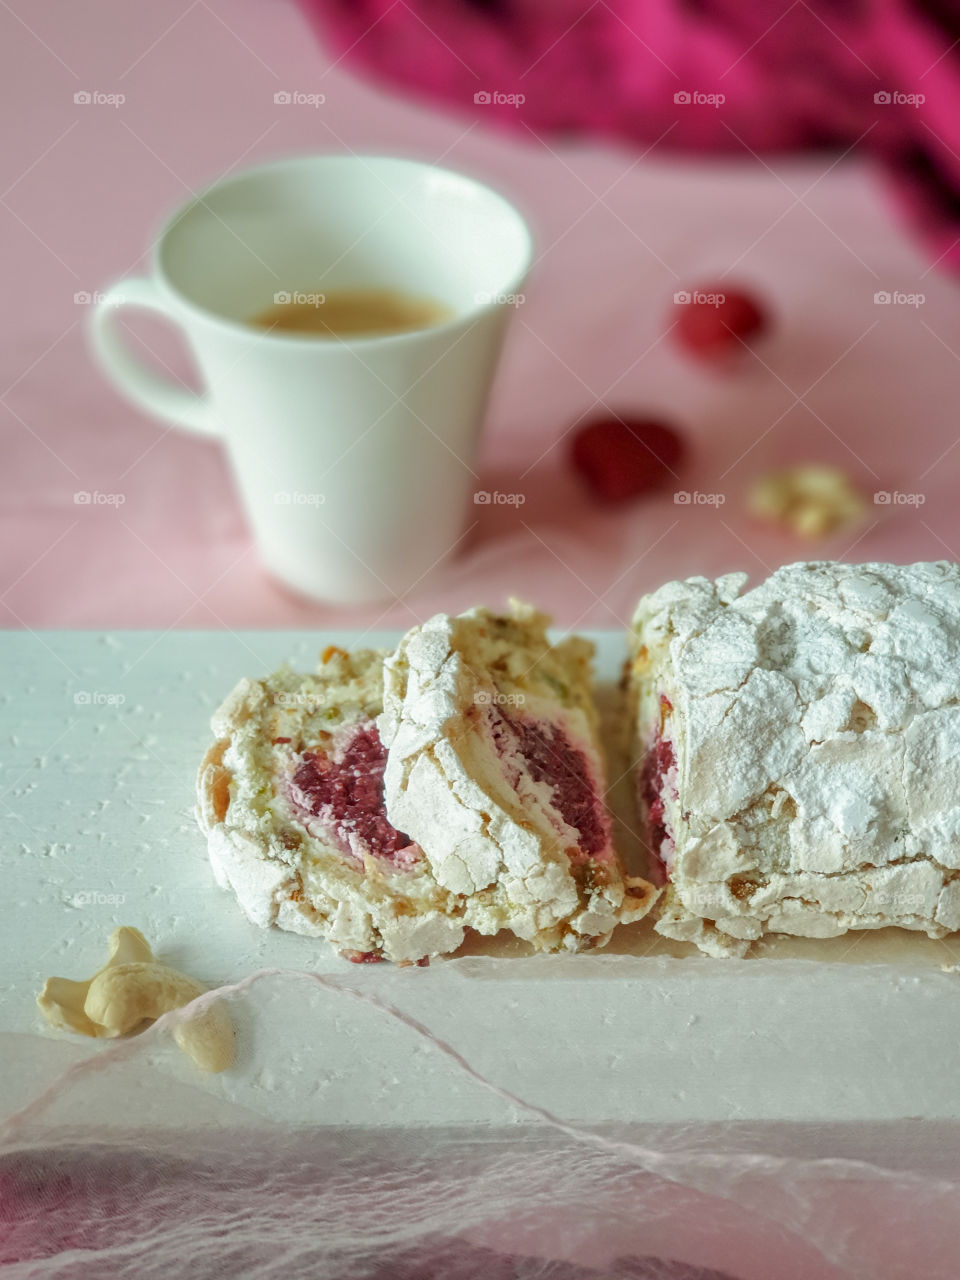 Romantic Breakfast with a raspberry nut cake, cup of freshly brewed coffee and raspberries. Easy healthy sweet snack girl. The concept of Valentine's day. Food photos, top view, copy space

 